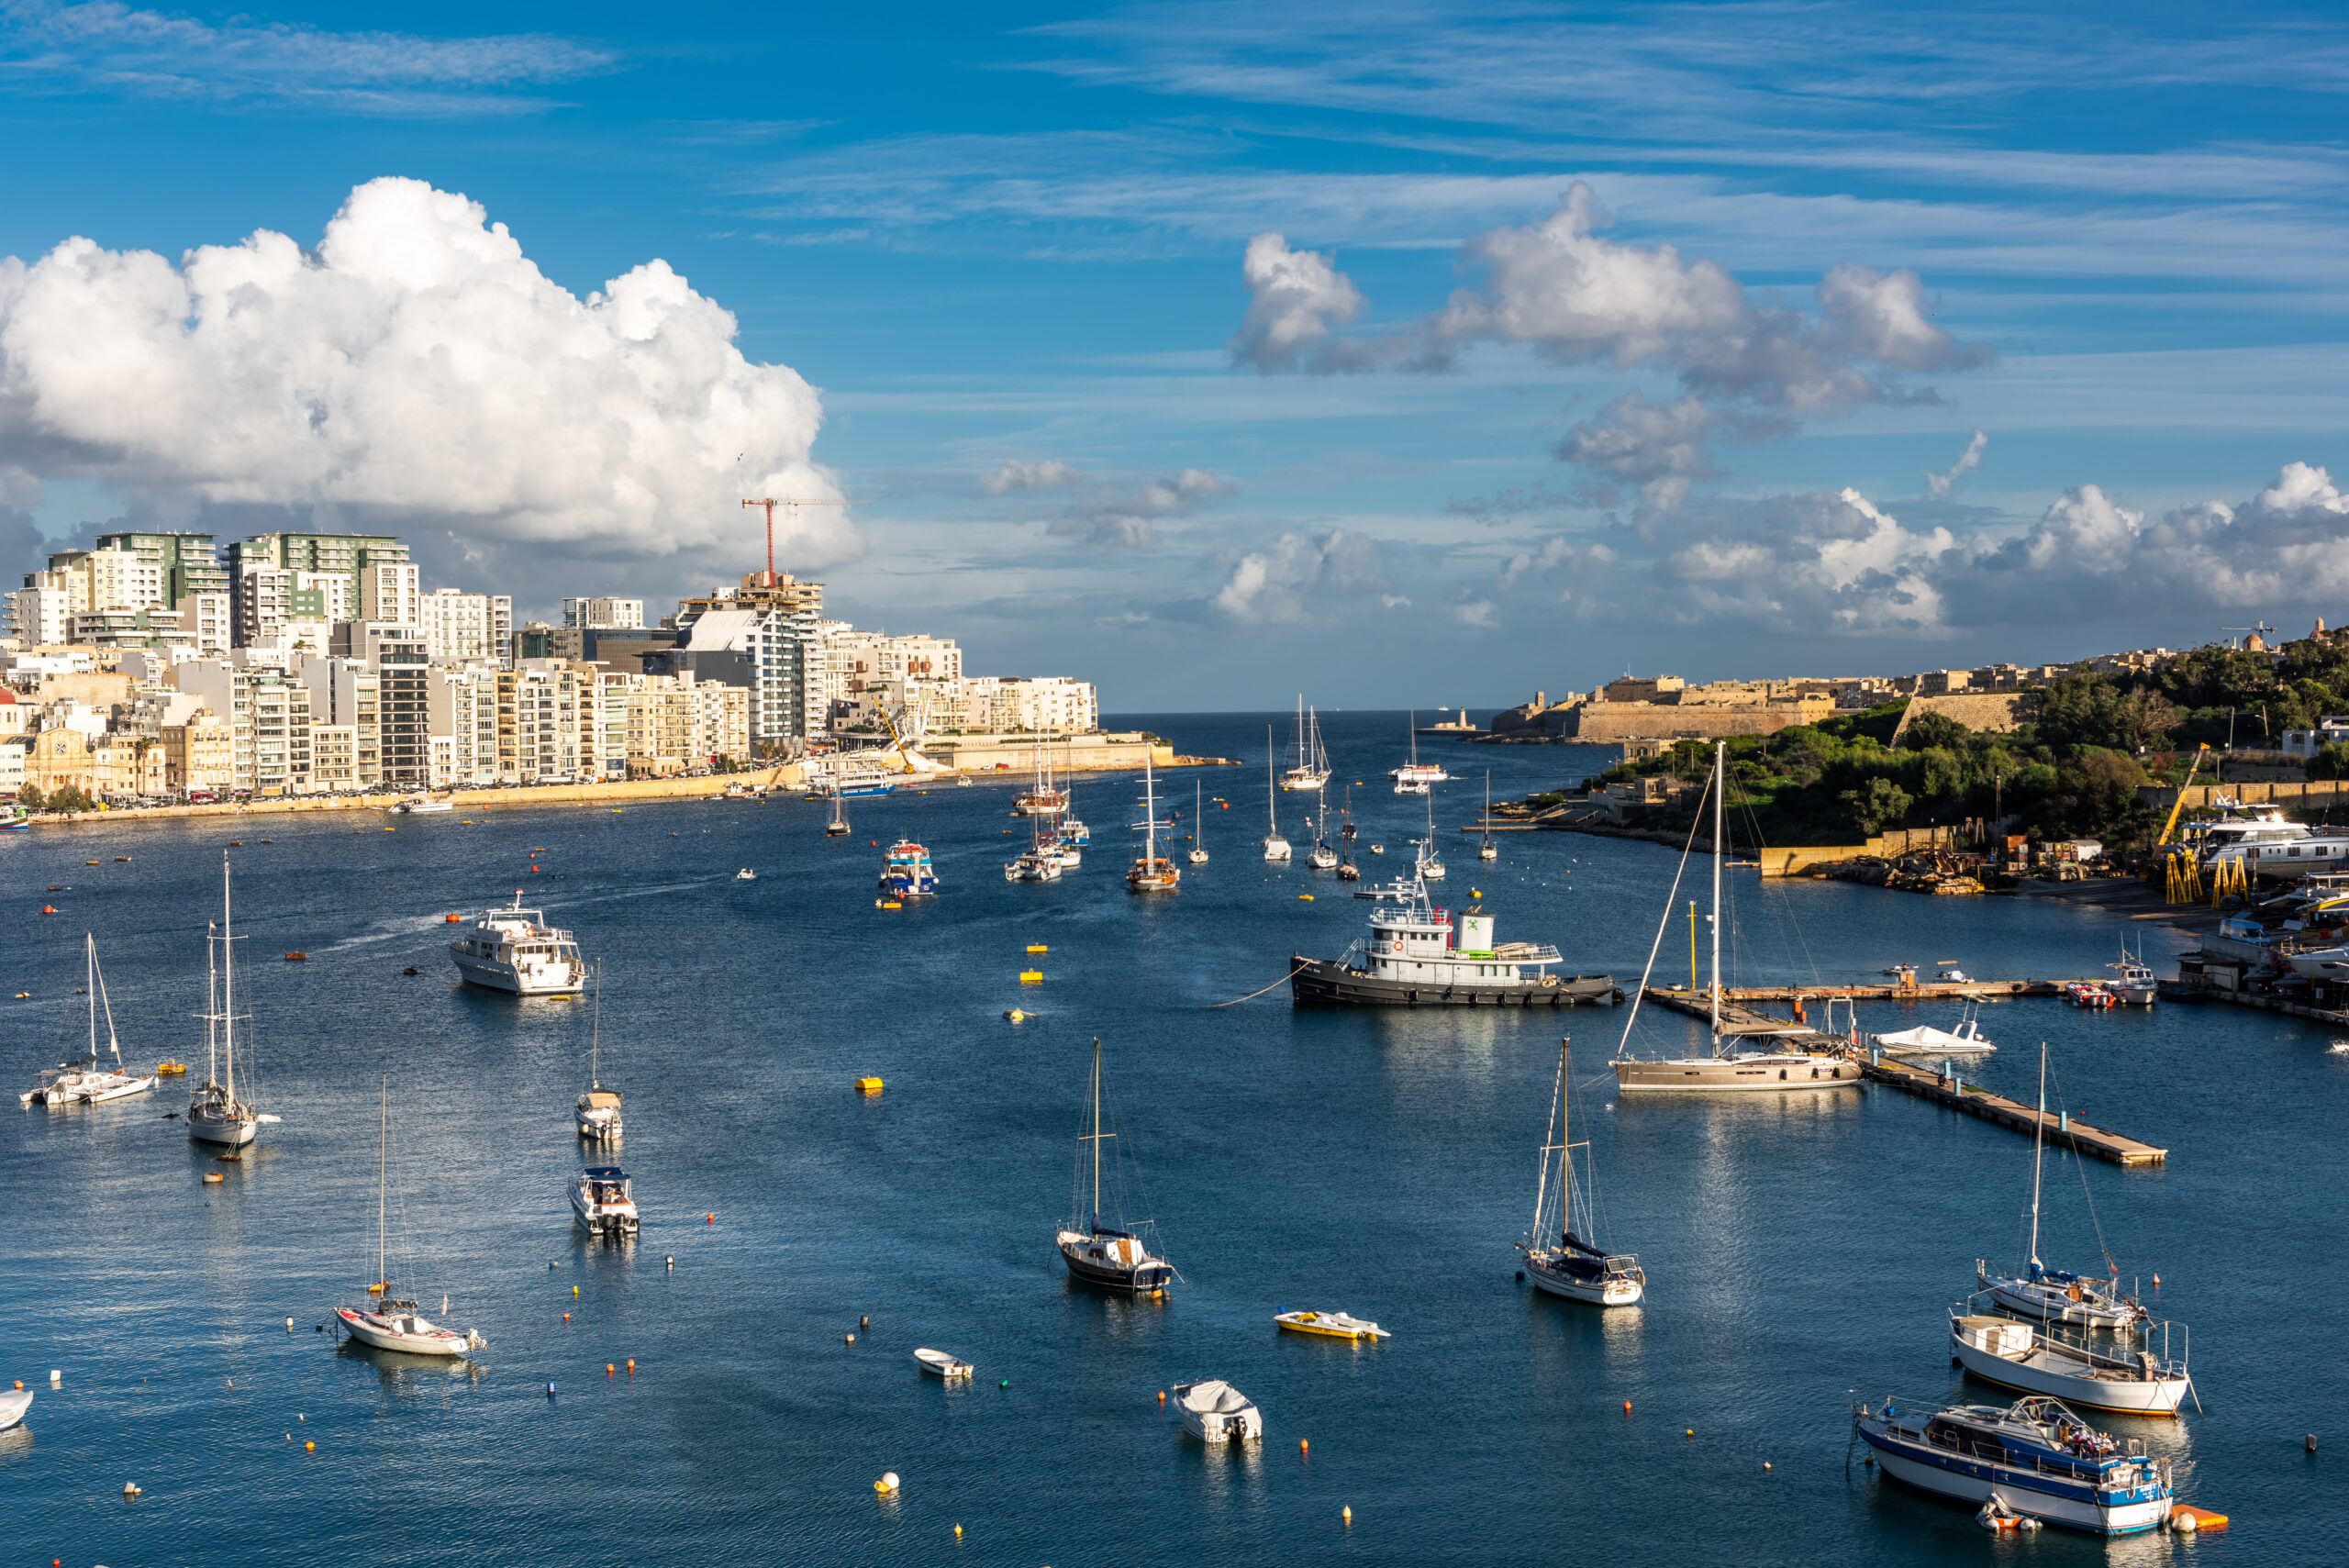 Malta – History, Geography, Economy and Culture